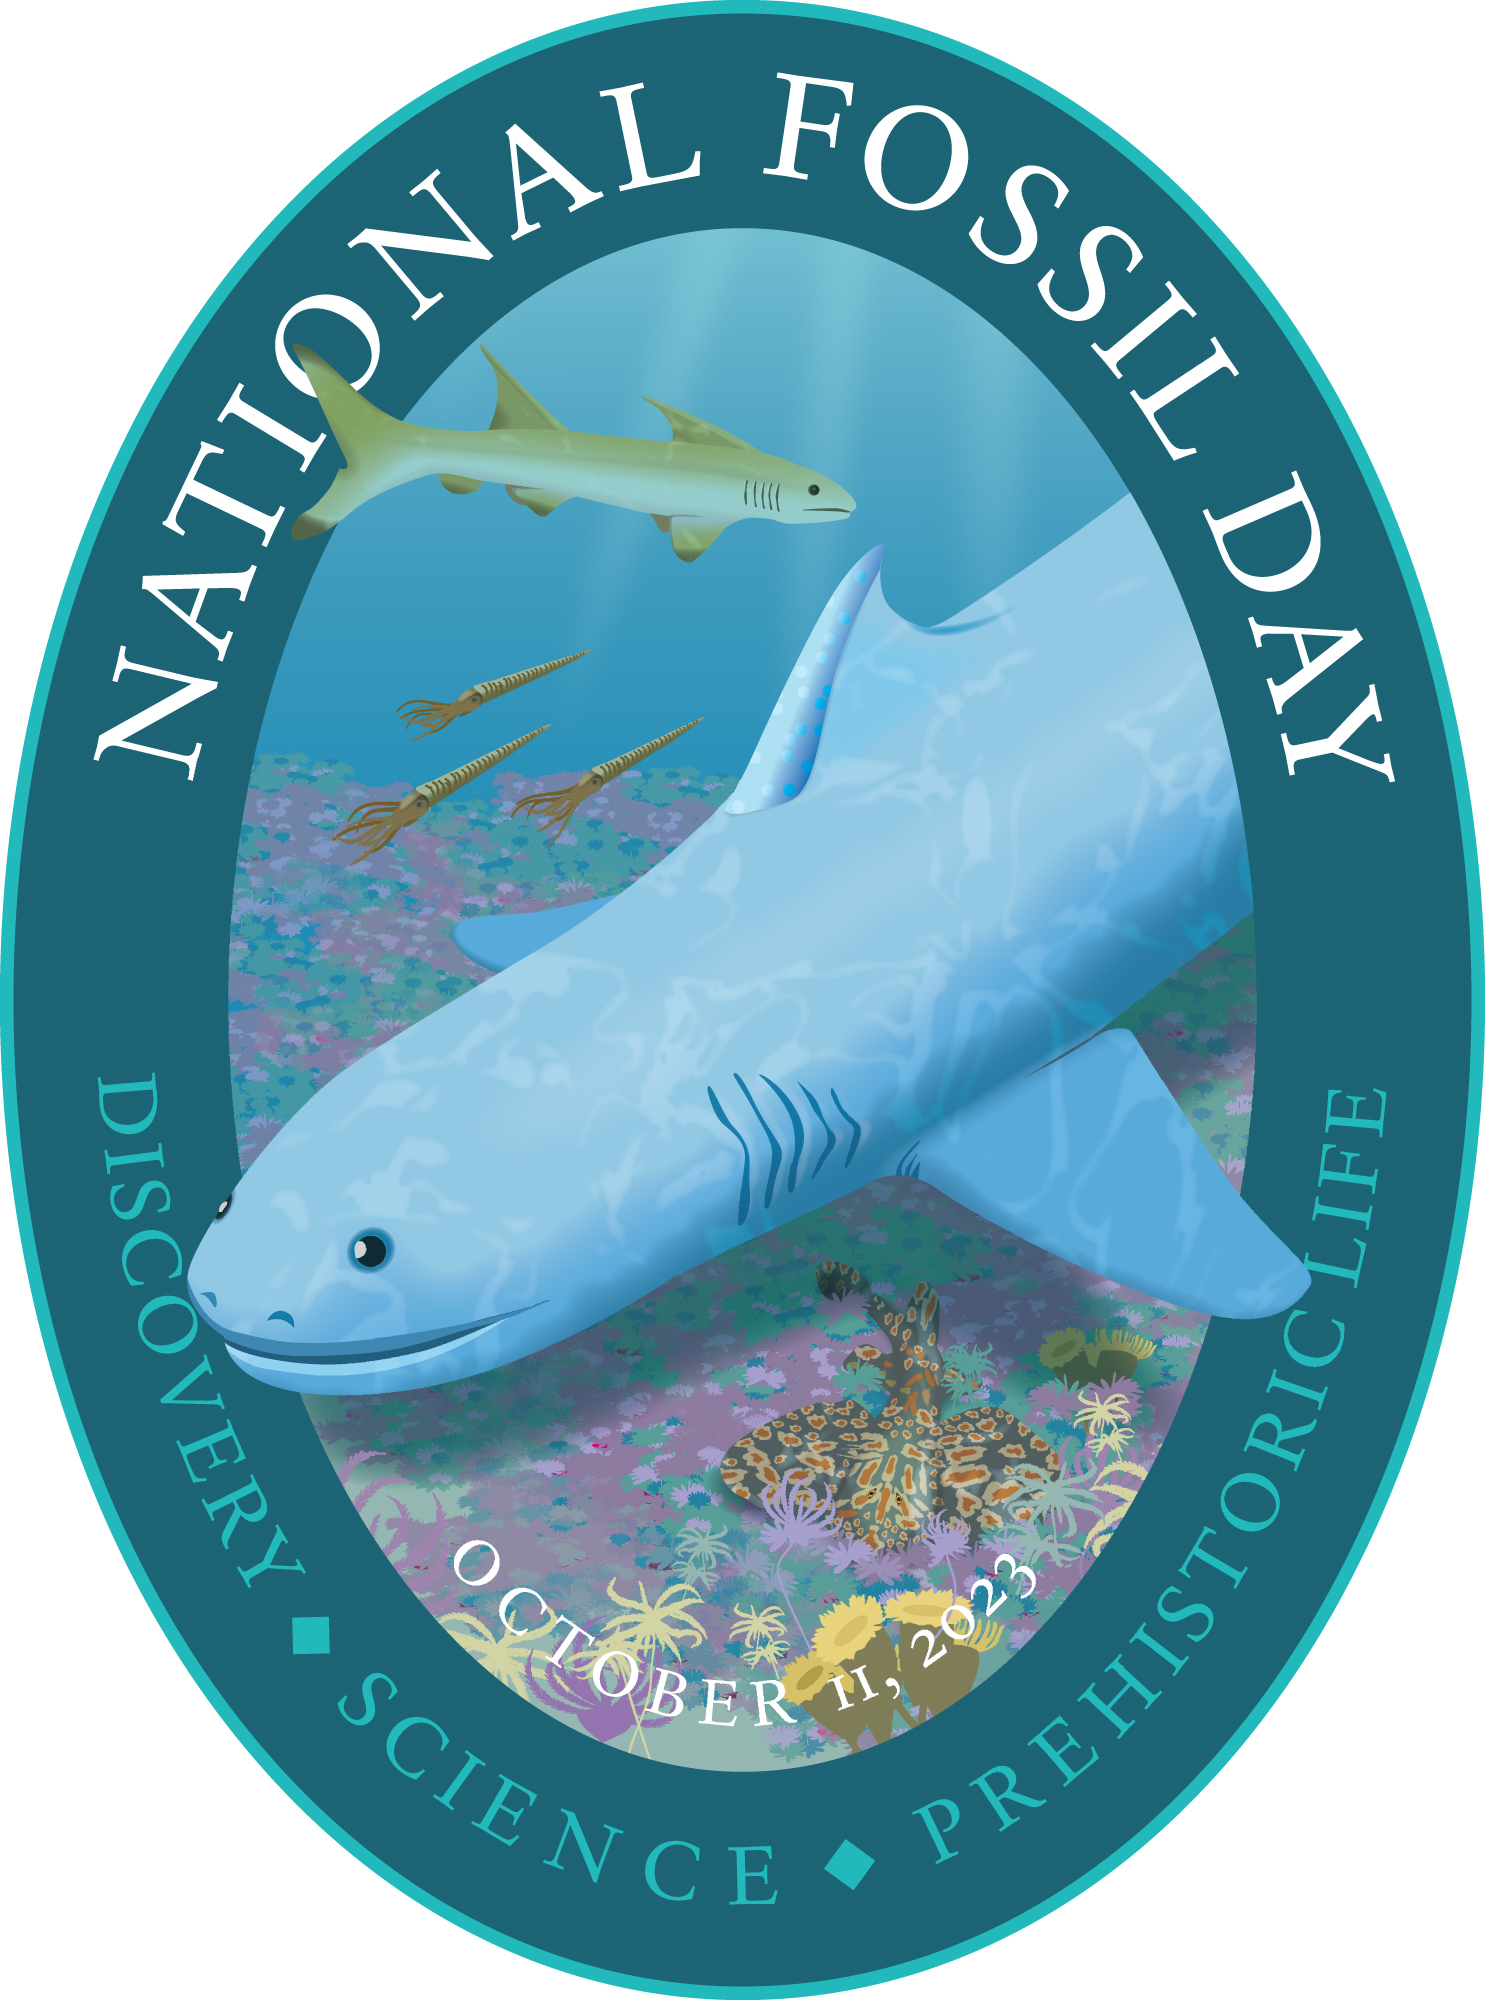 National Fossil Day 2023 Artwork National Fossil Day (U.S. National